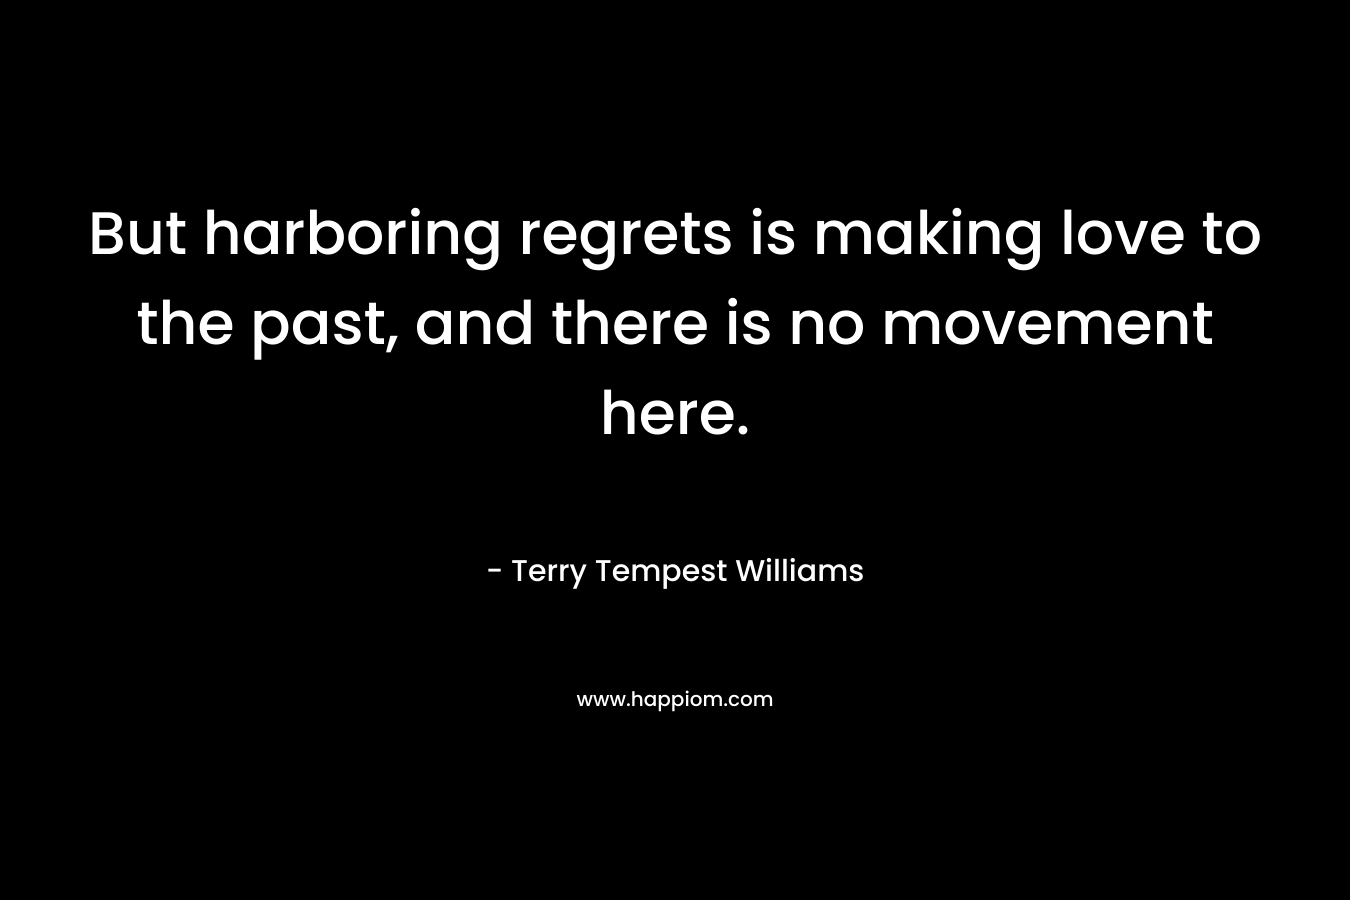 But harboring regrets is making love to the past, and there is no movement here. – Terry Tempest Williams